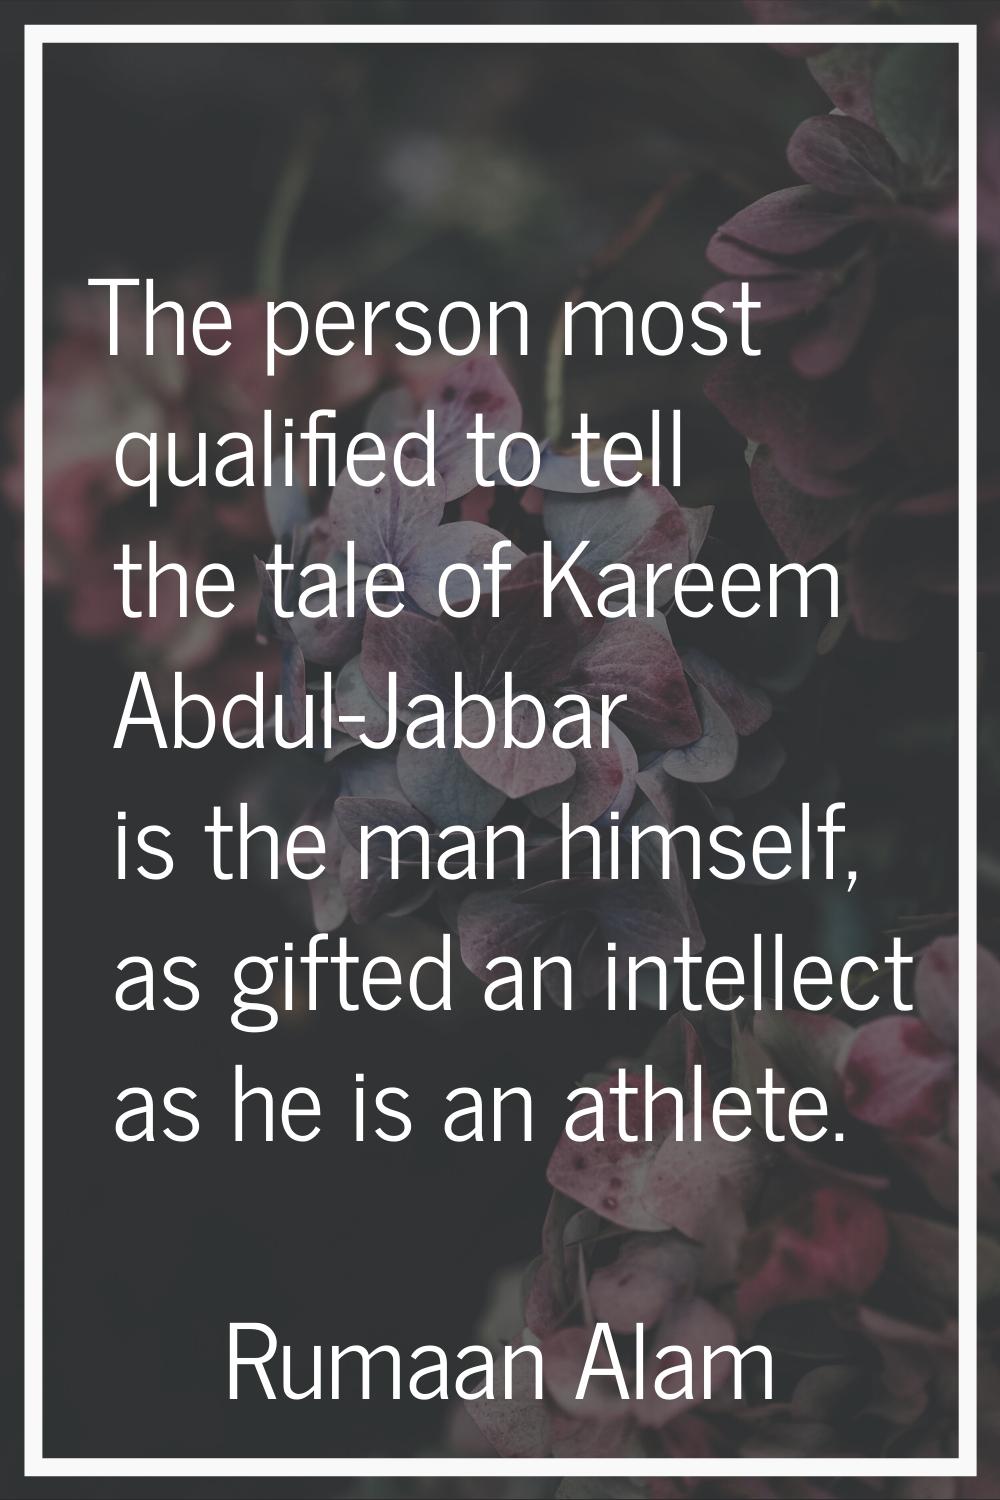 The person most qualified to tell the tale of Kareem Abdul-Jabbar is the man himself, as gifted an 